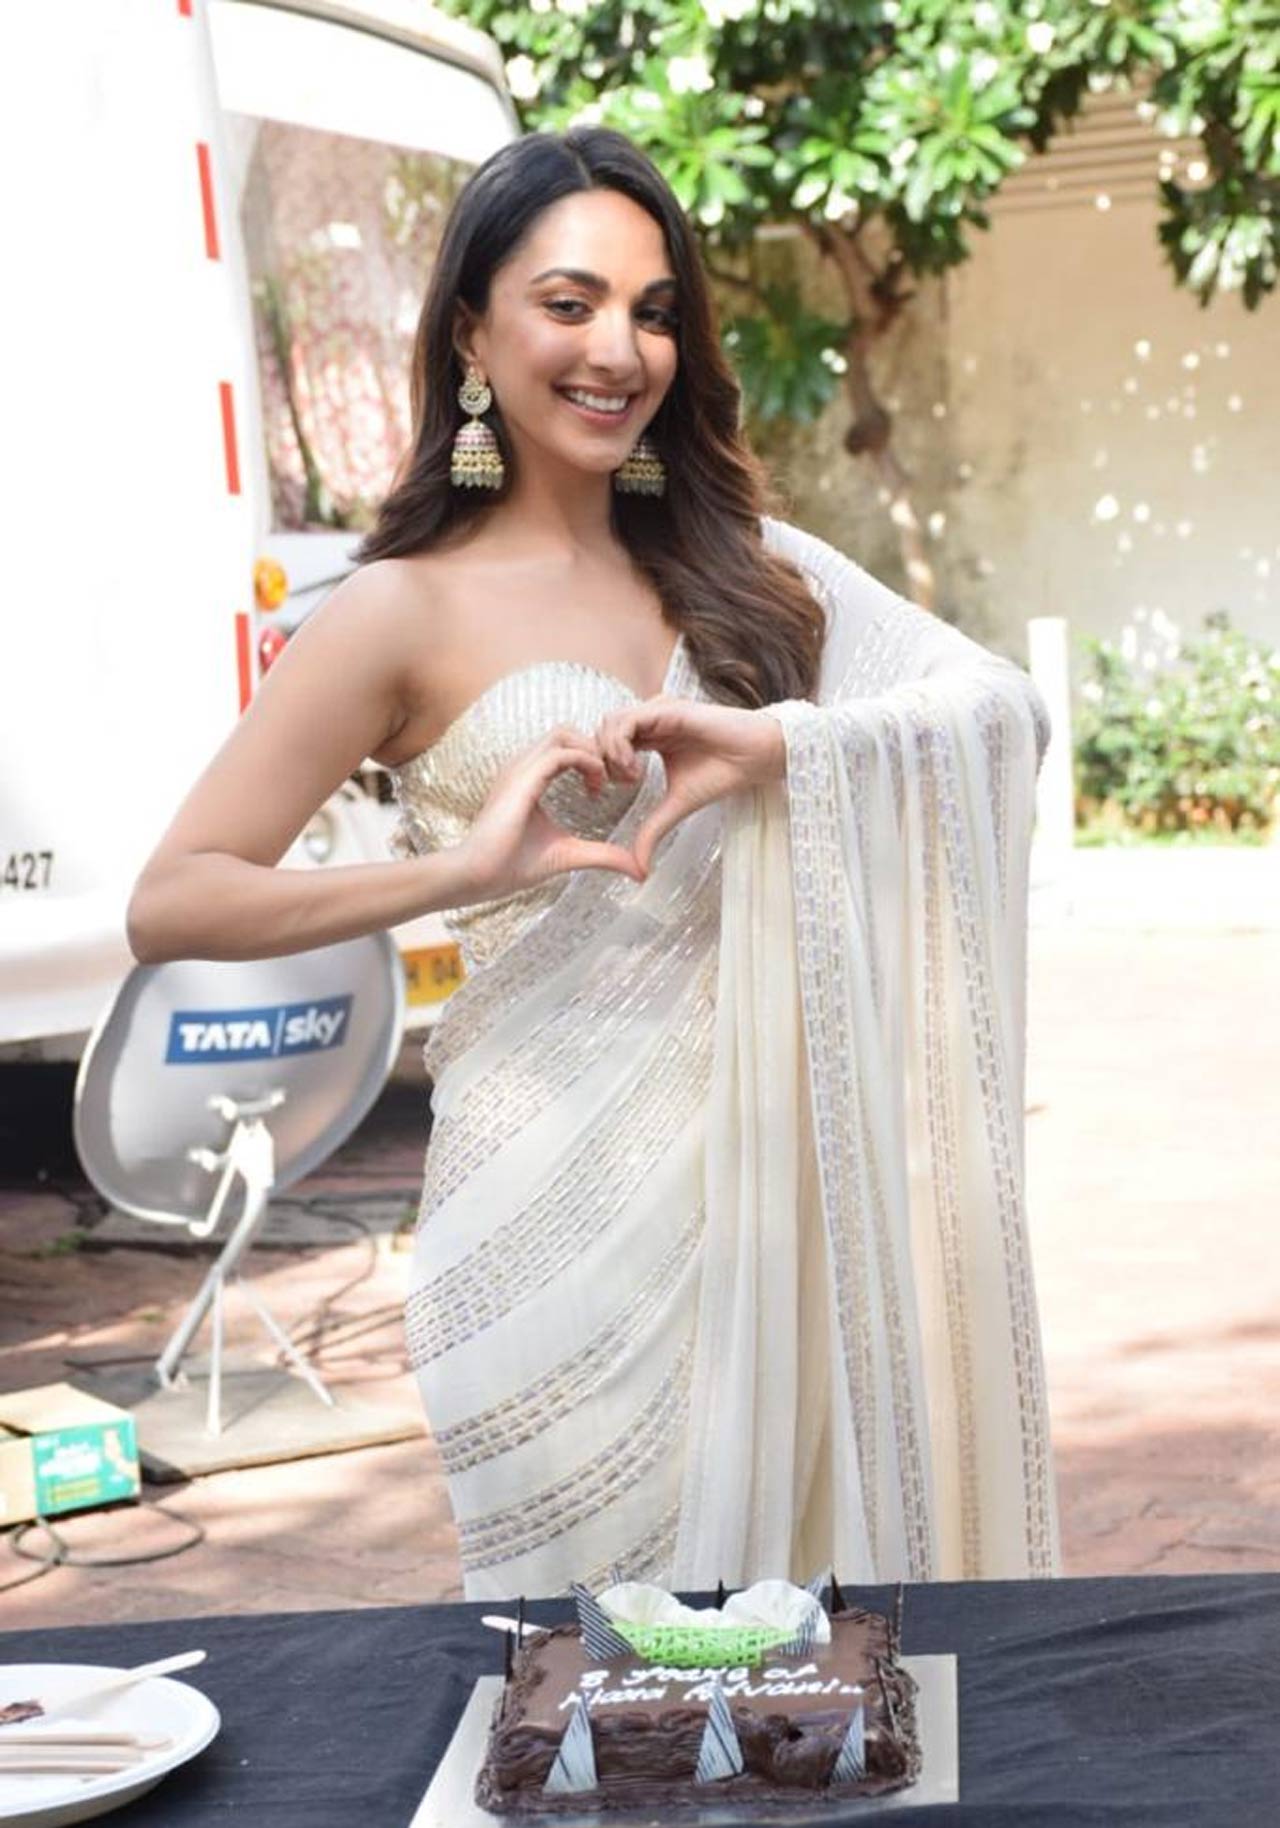 Kiara Advani made her Bollywood debut with 'Fugly' on this day in 2014. As the actress clocked eight glorious years, she celebrated the occasion by cutting a cake in a stunning sari with the paparazzi